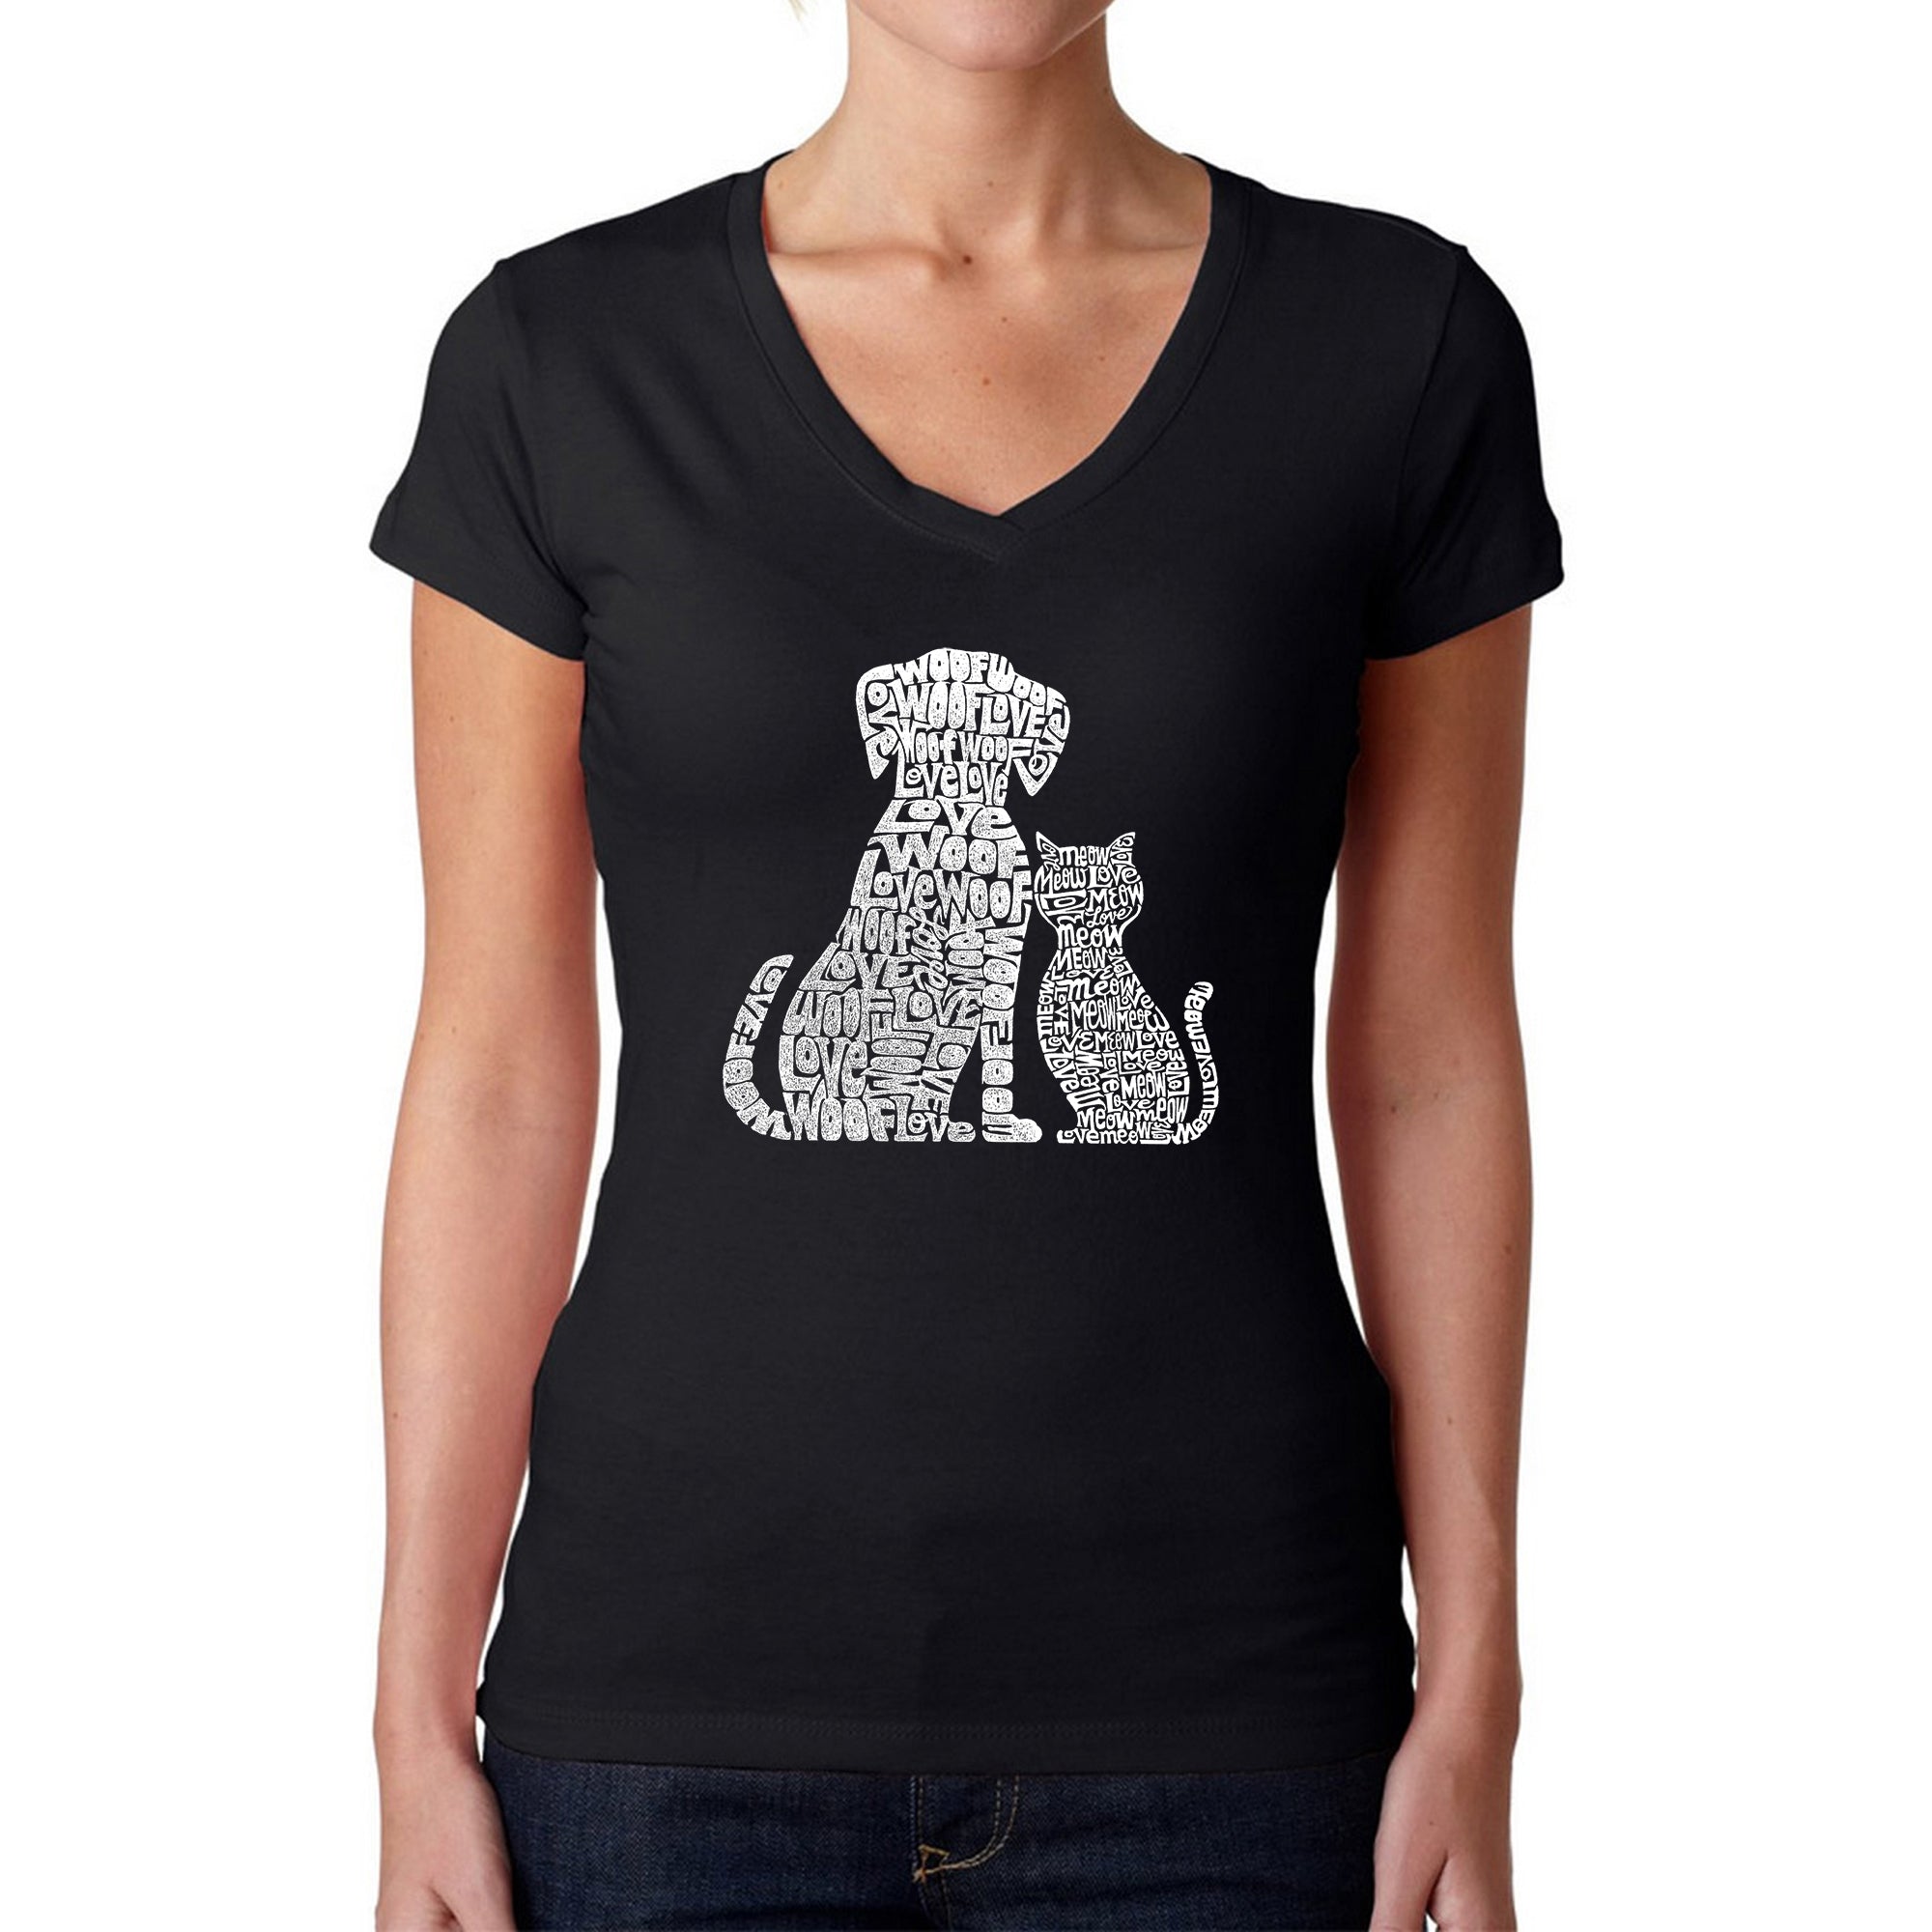 Dogs And Cats - Women's Word Art V-Neck T-Shirt - Large